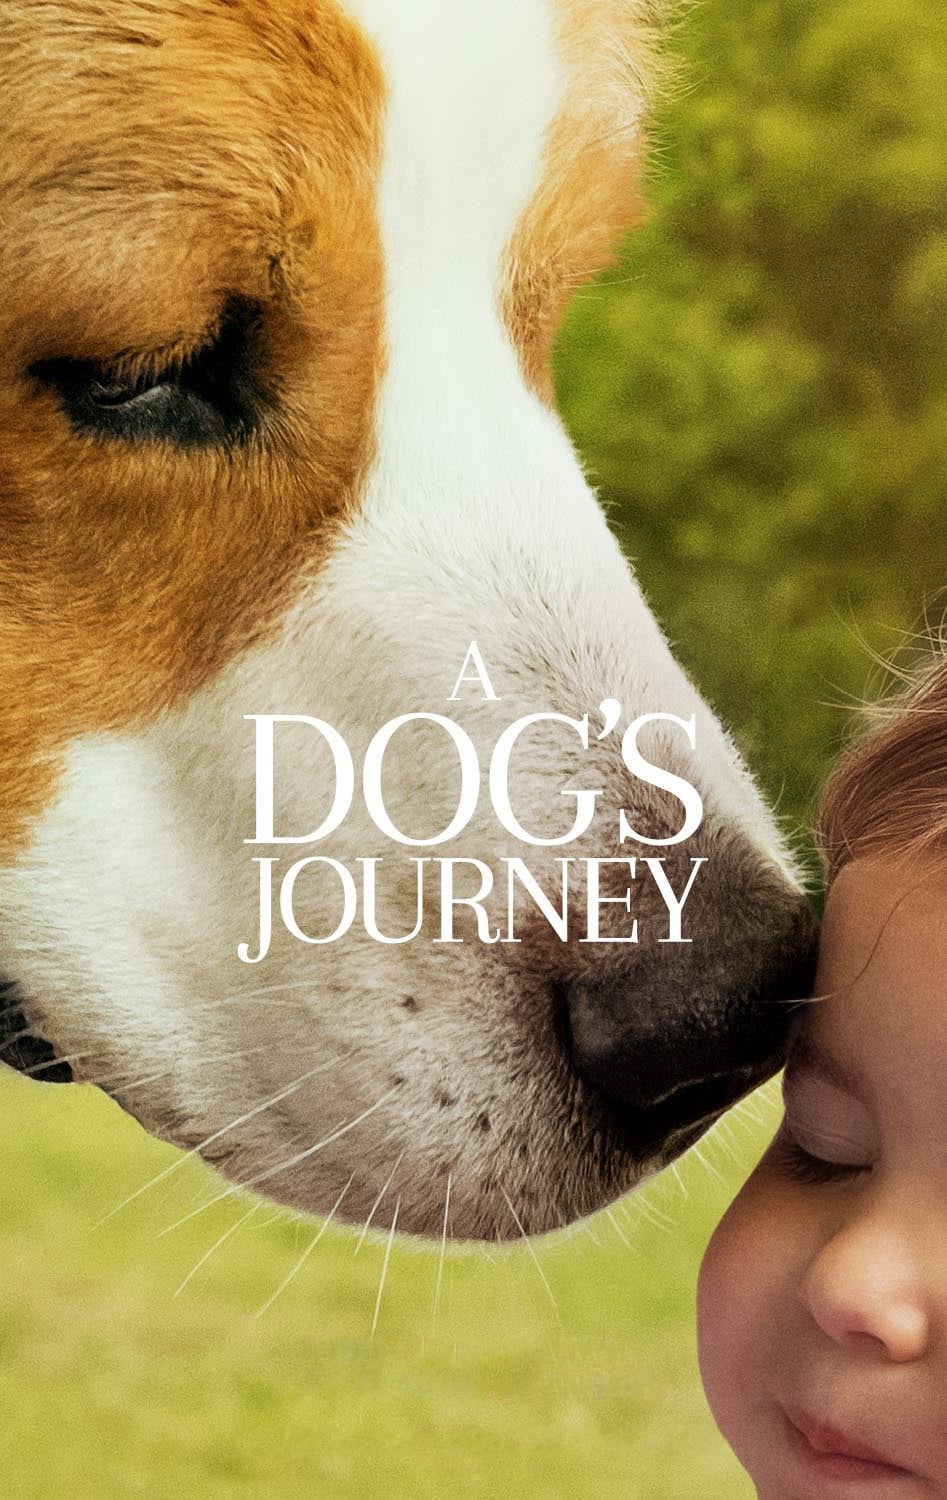 A Dog's Journey Picture